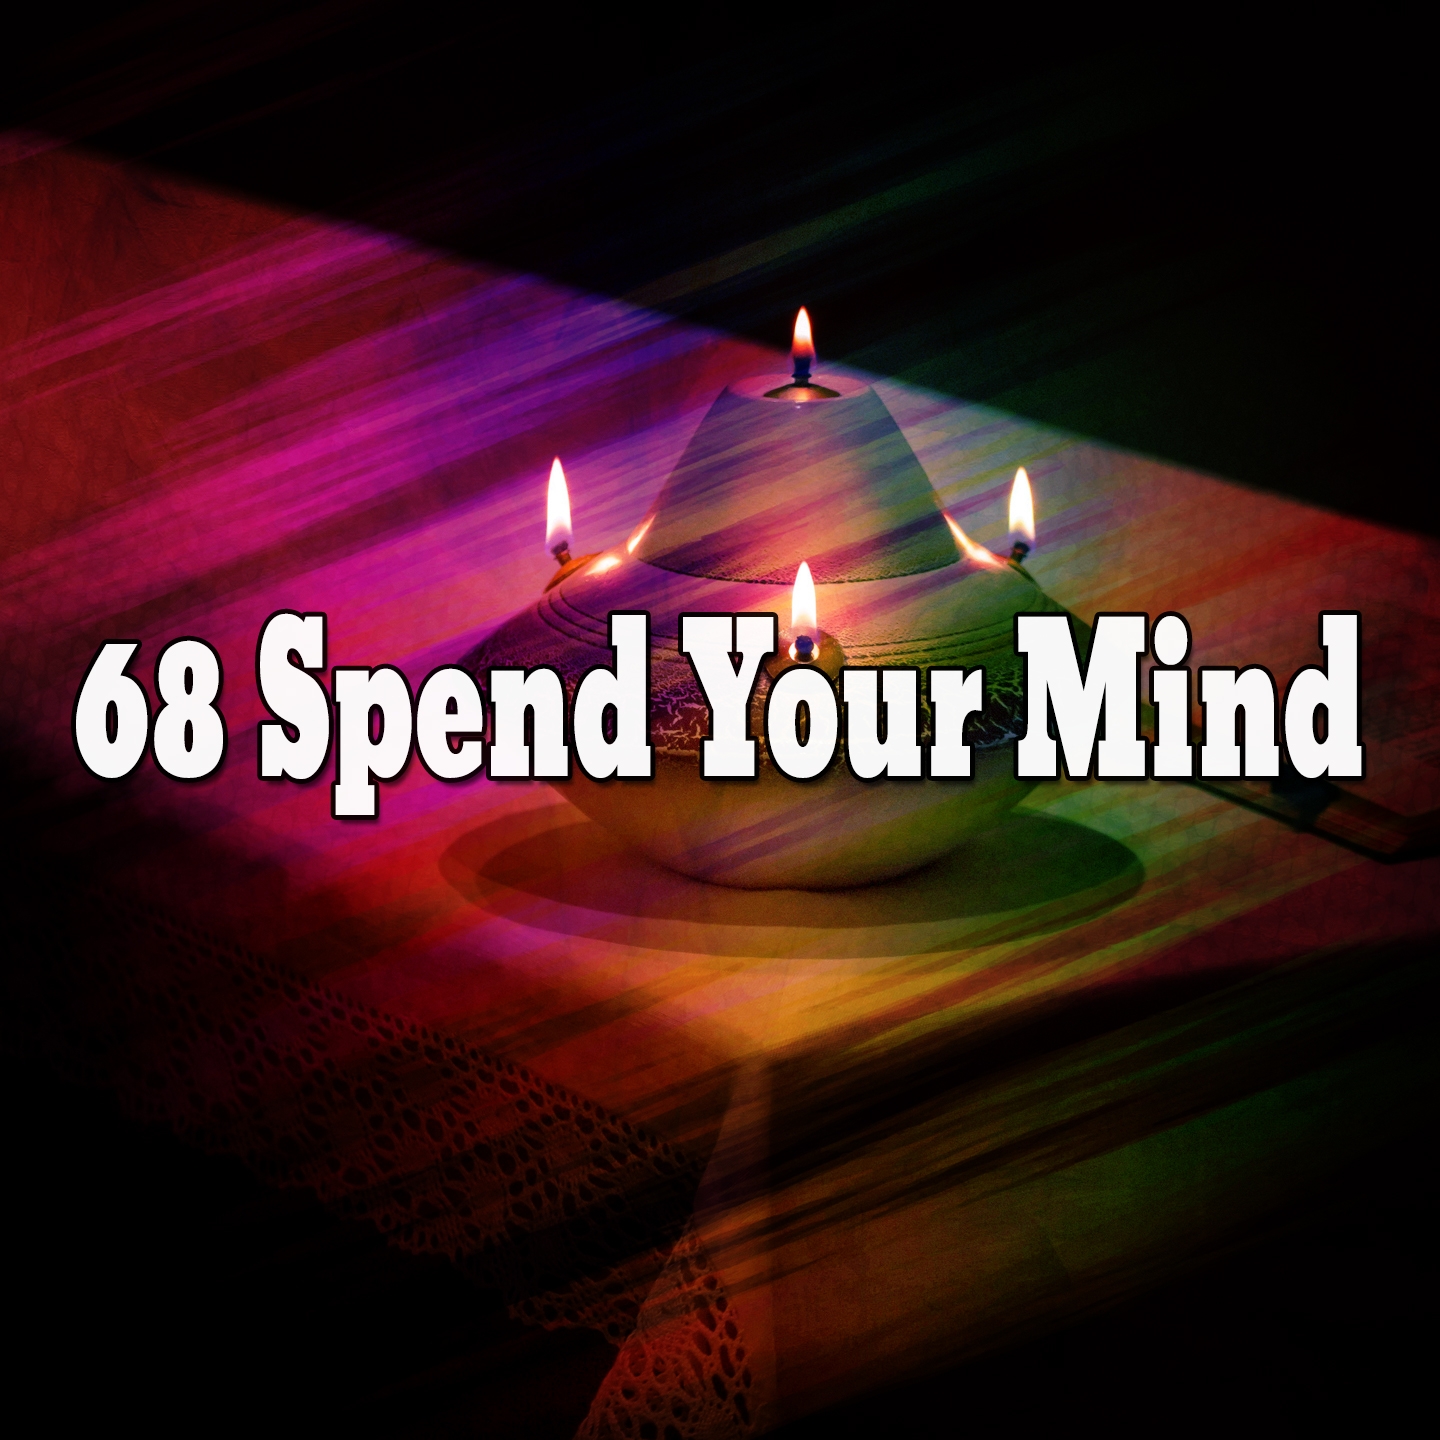 68 Spend Your Mind